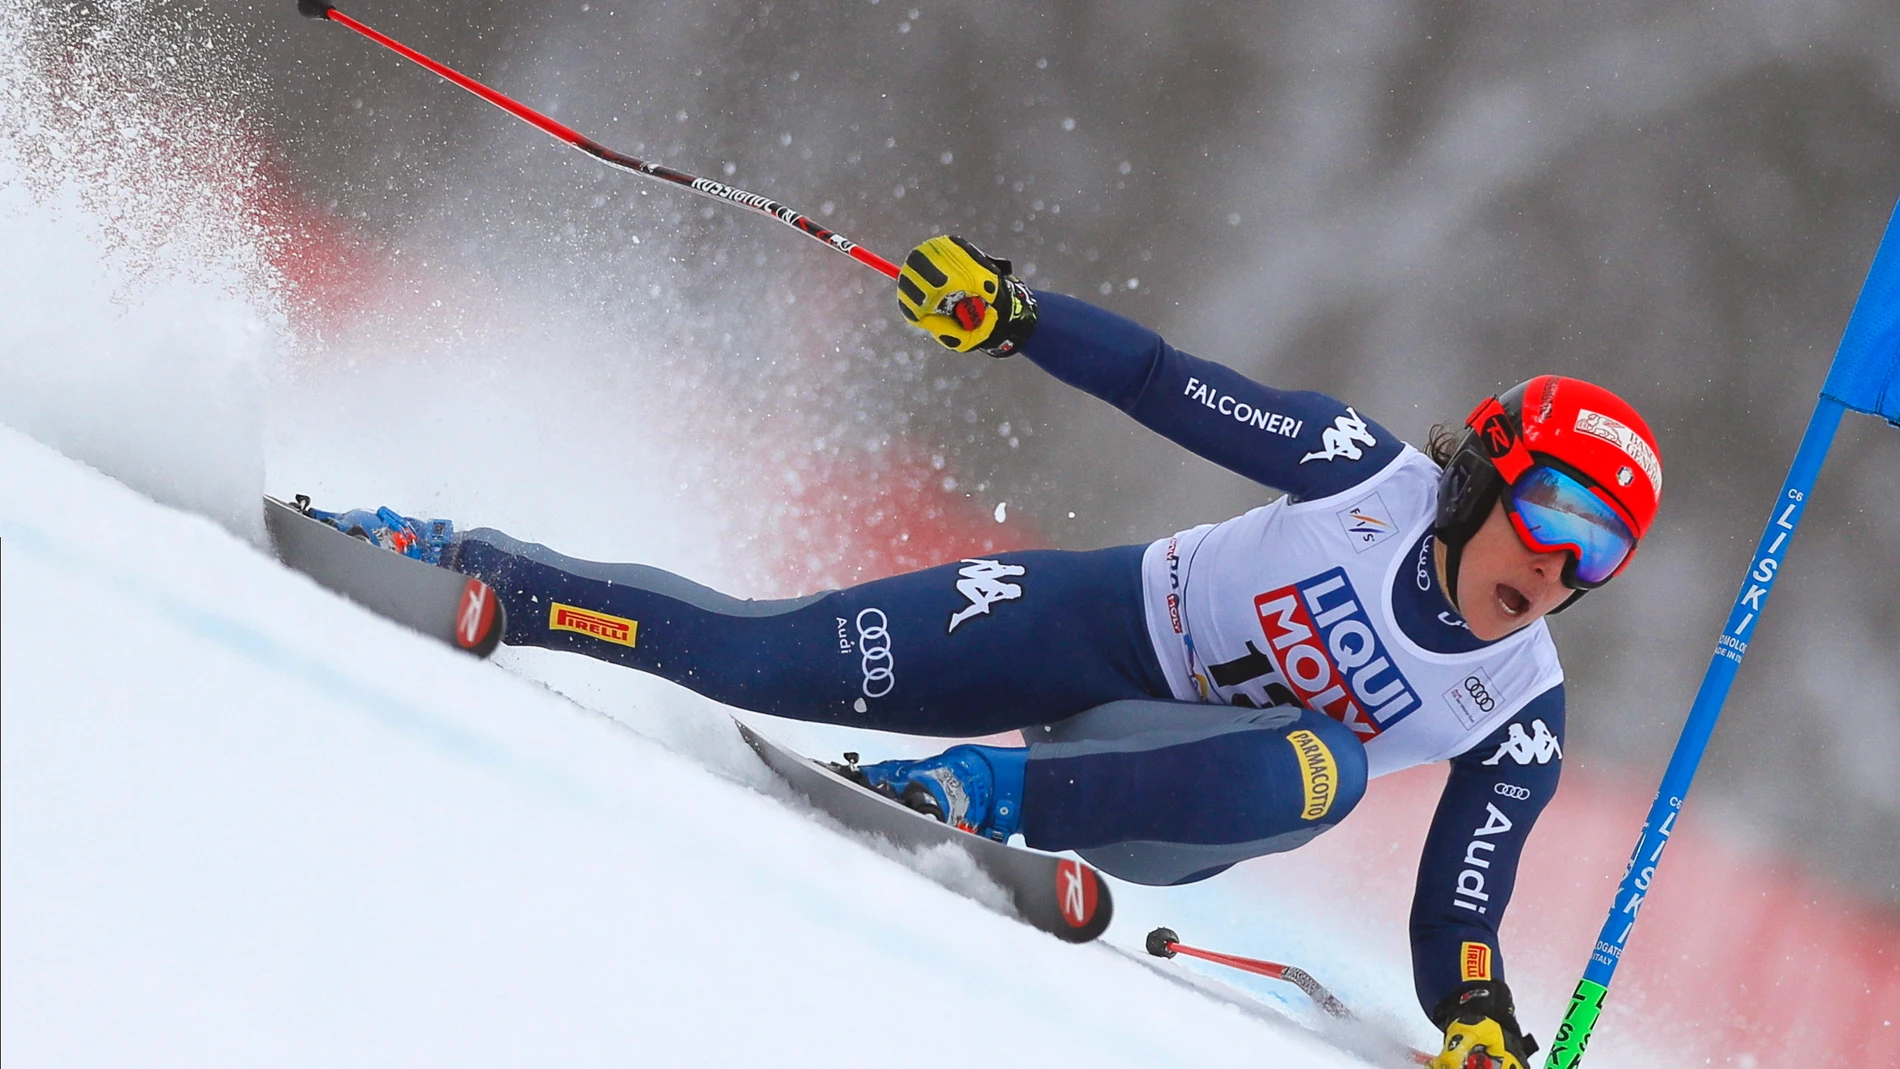 FIS Alpine Skiing World Cup in Rosa Khutor